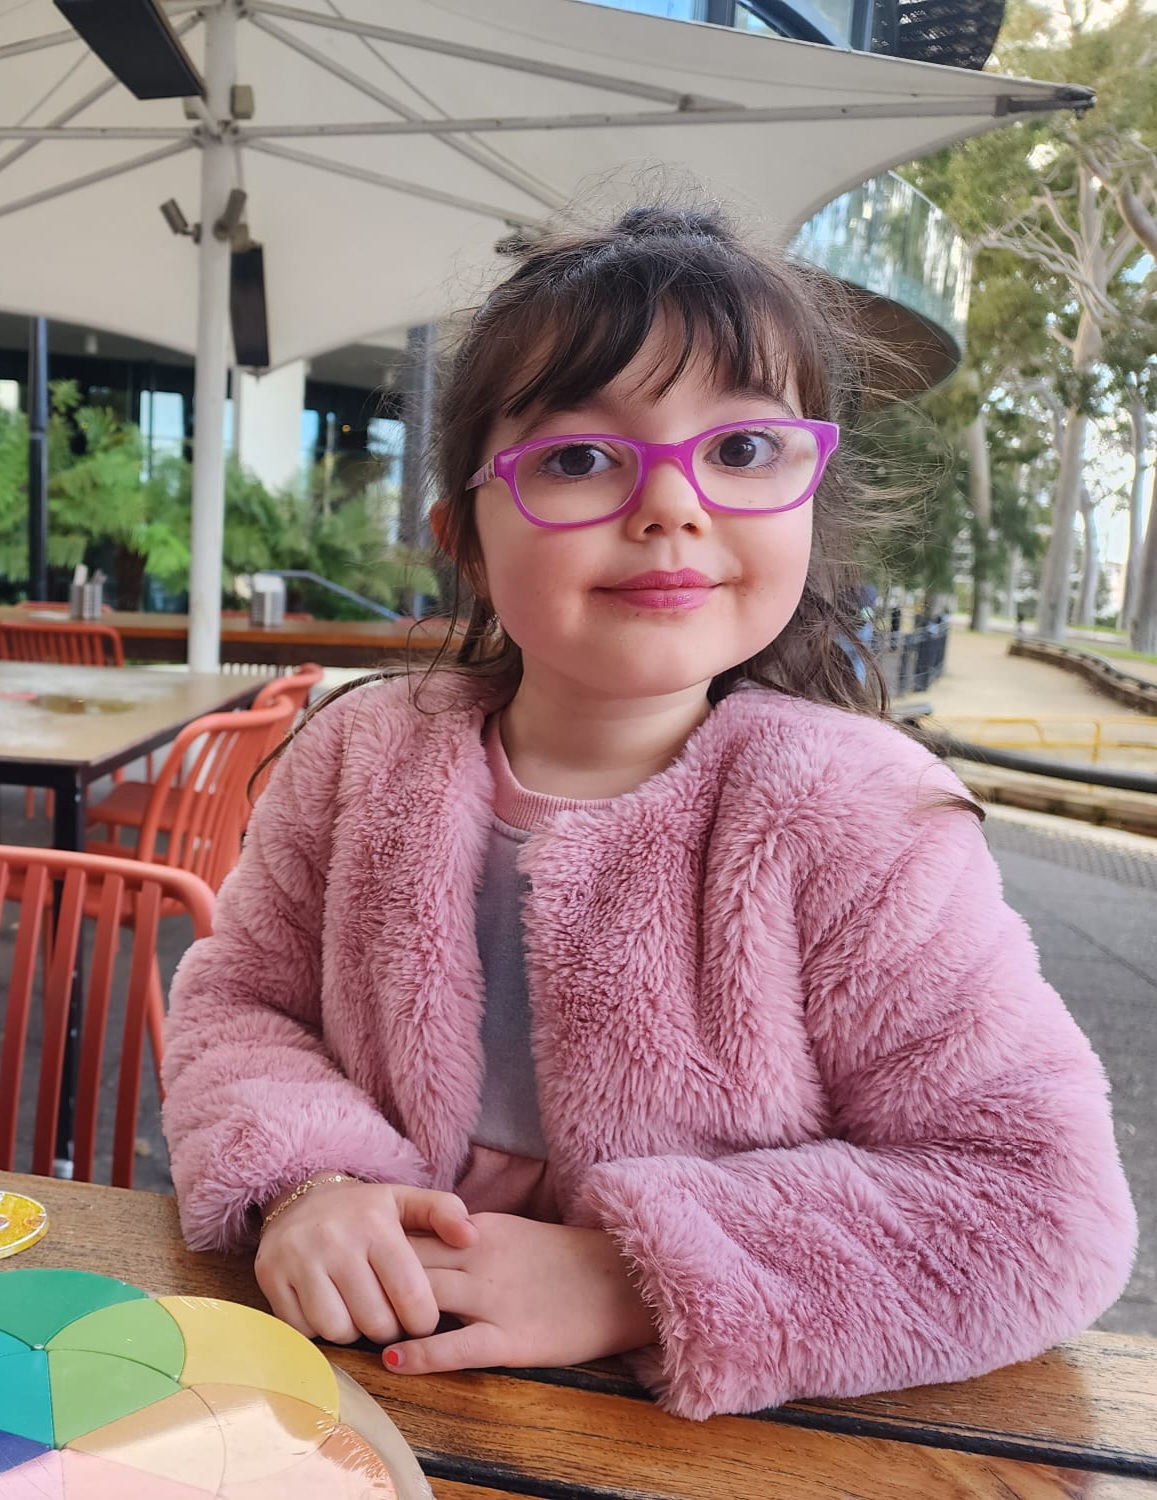 RAG-1 SCID patient Olympia has come ahead in “leaps and bounds” after receiving a bone marrow transplant.